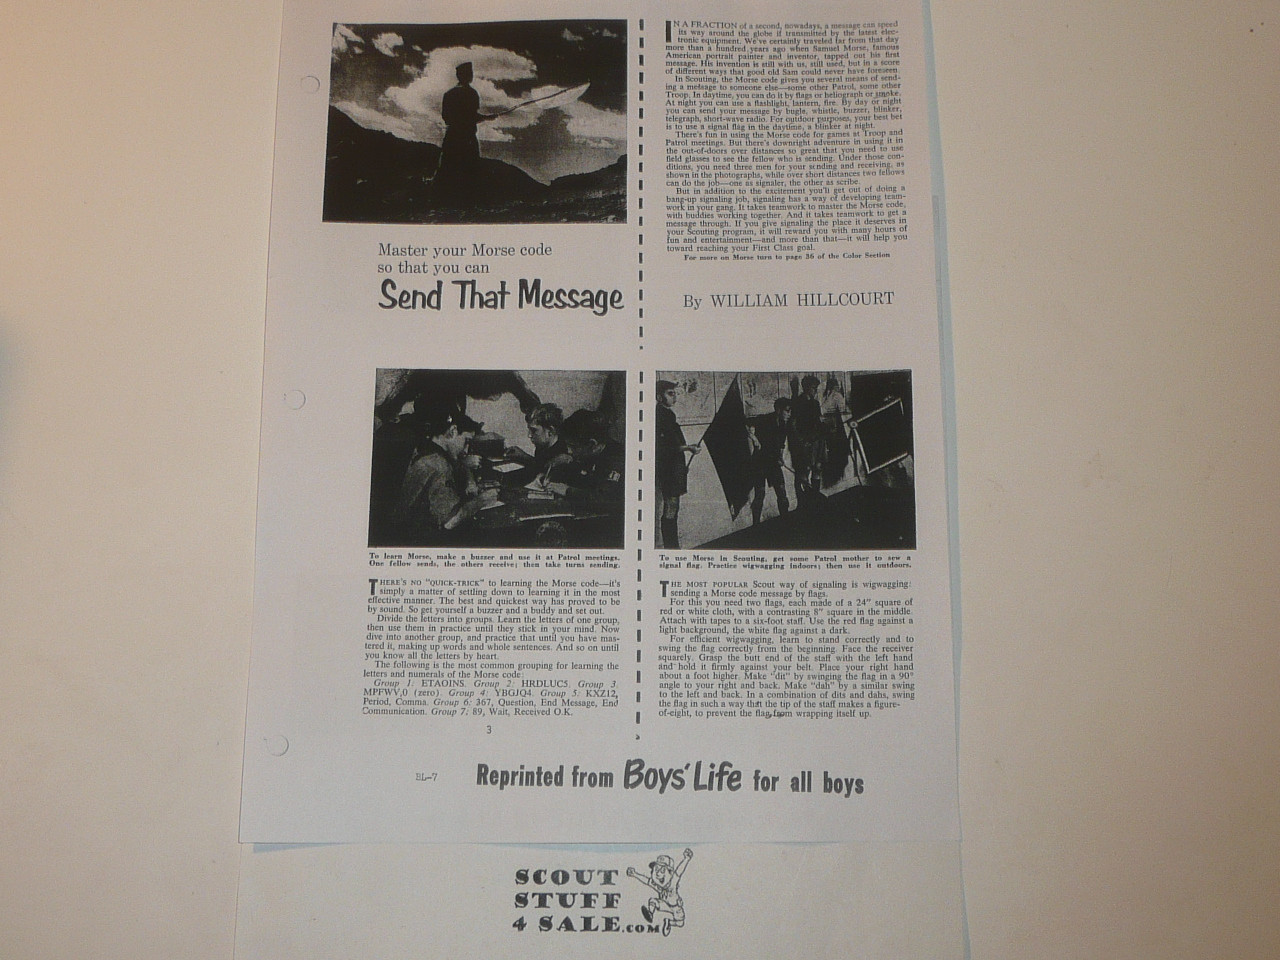 Send that Message by Morse Code, By Green Bar Bill, Boys' Life Single Topic Reprint from the 1950's - 1960's , written for Scouts, great teaching materials